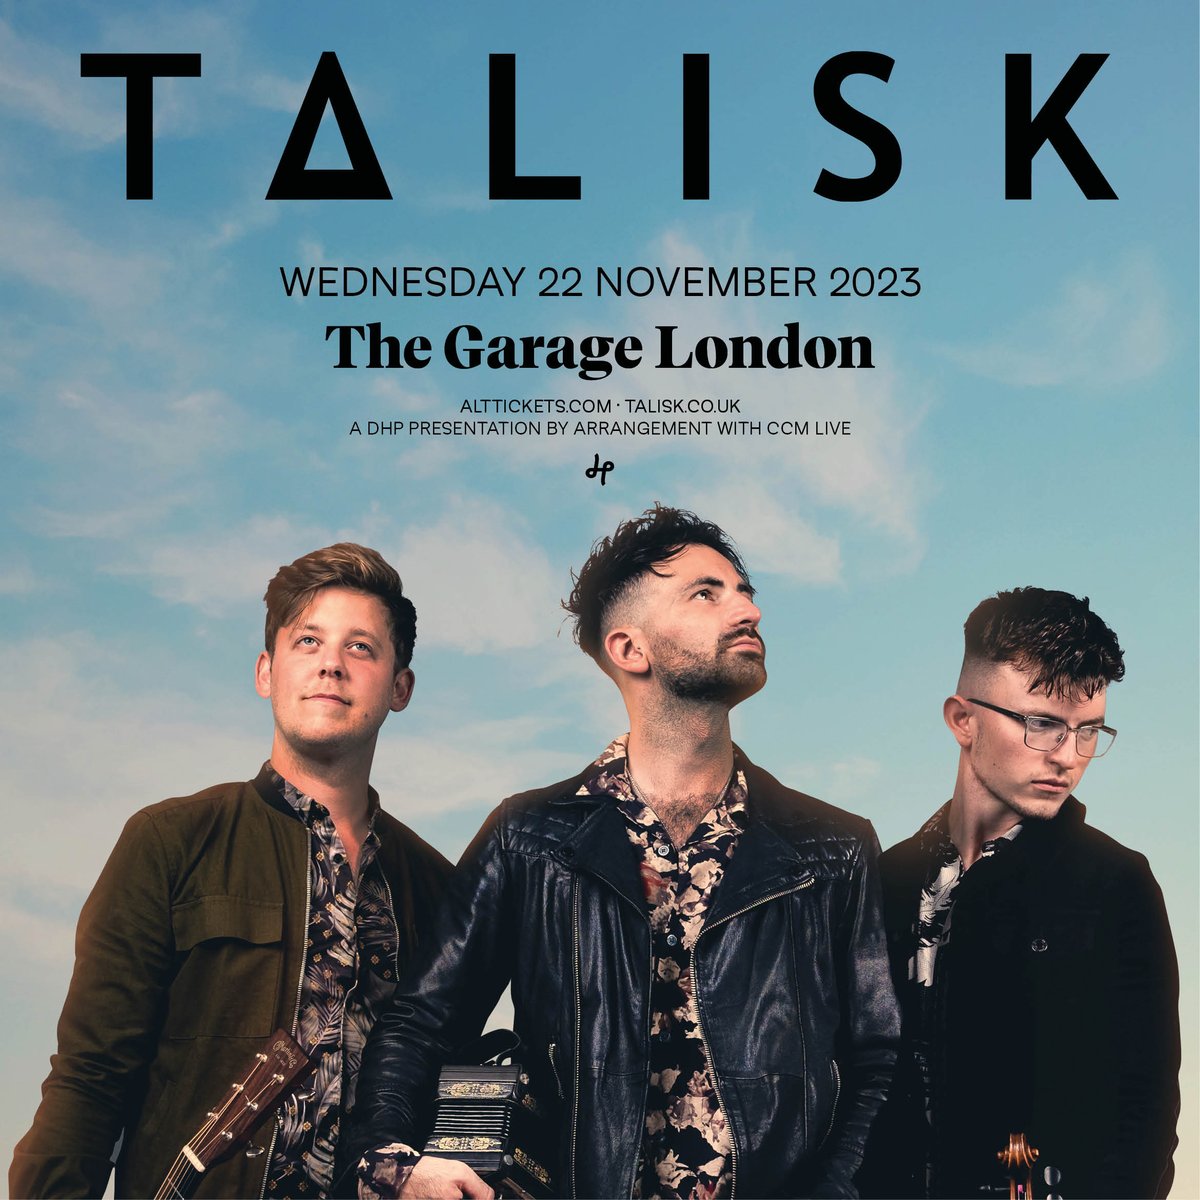 Ground-breaking, chart-topping, genre-bending, globe-trotting and instantly enthralling, Scottish folk-based group @TaliskMusic headline @TheGarageHQ in London on 22nd November! Tickets on sale now: bit.ly/3YddFX2